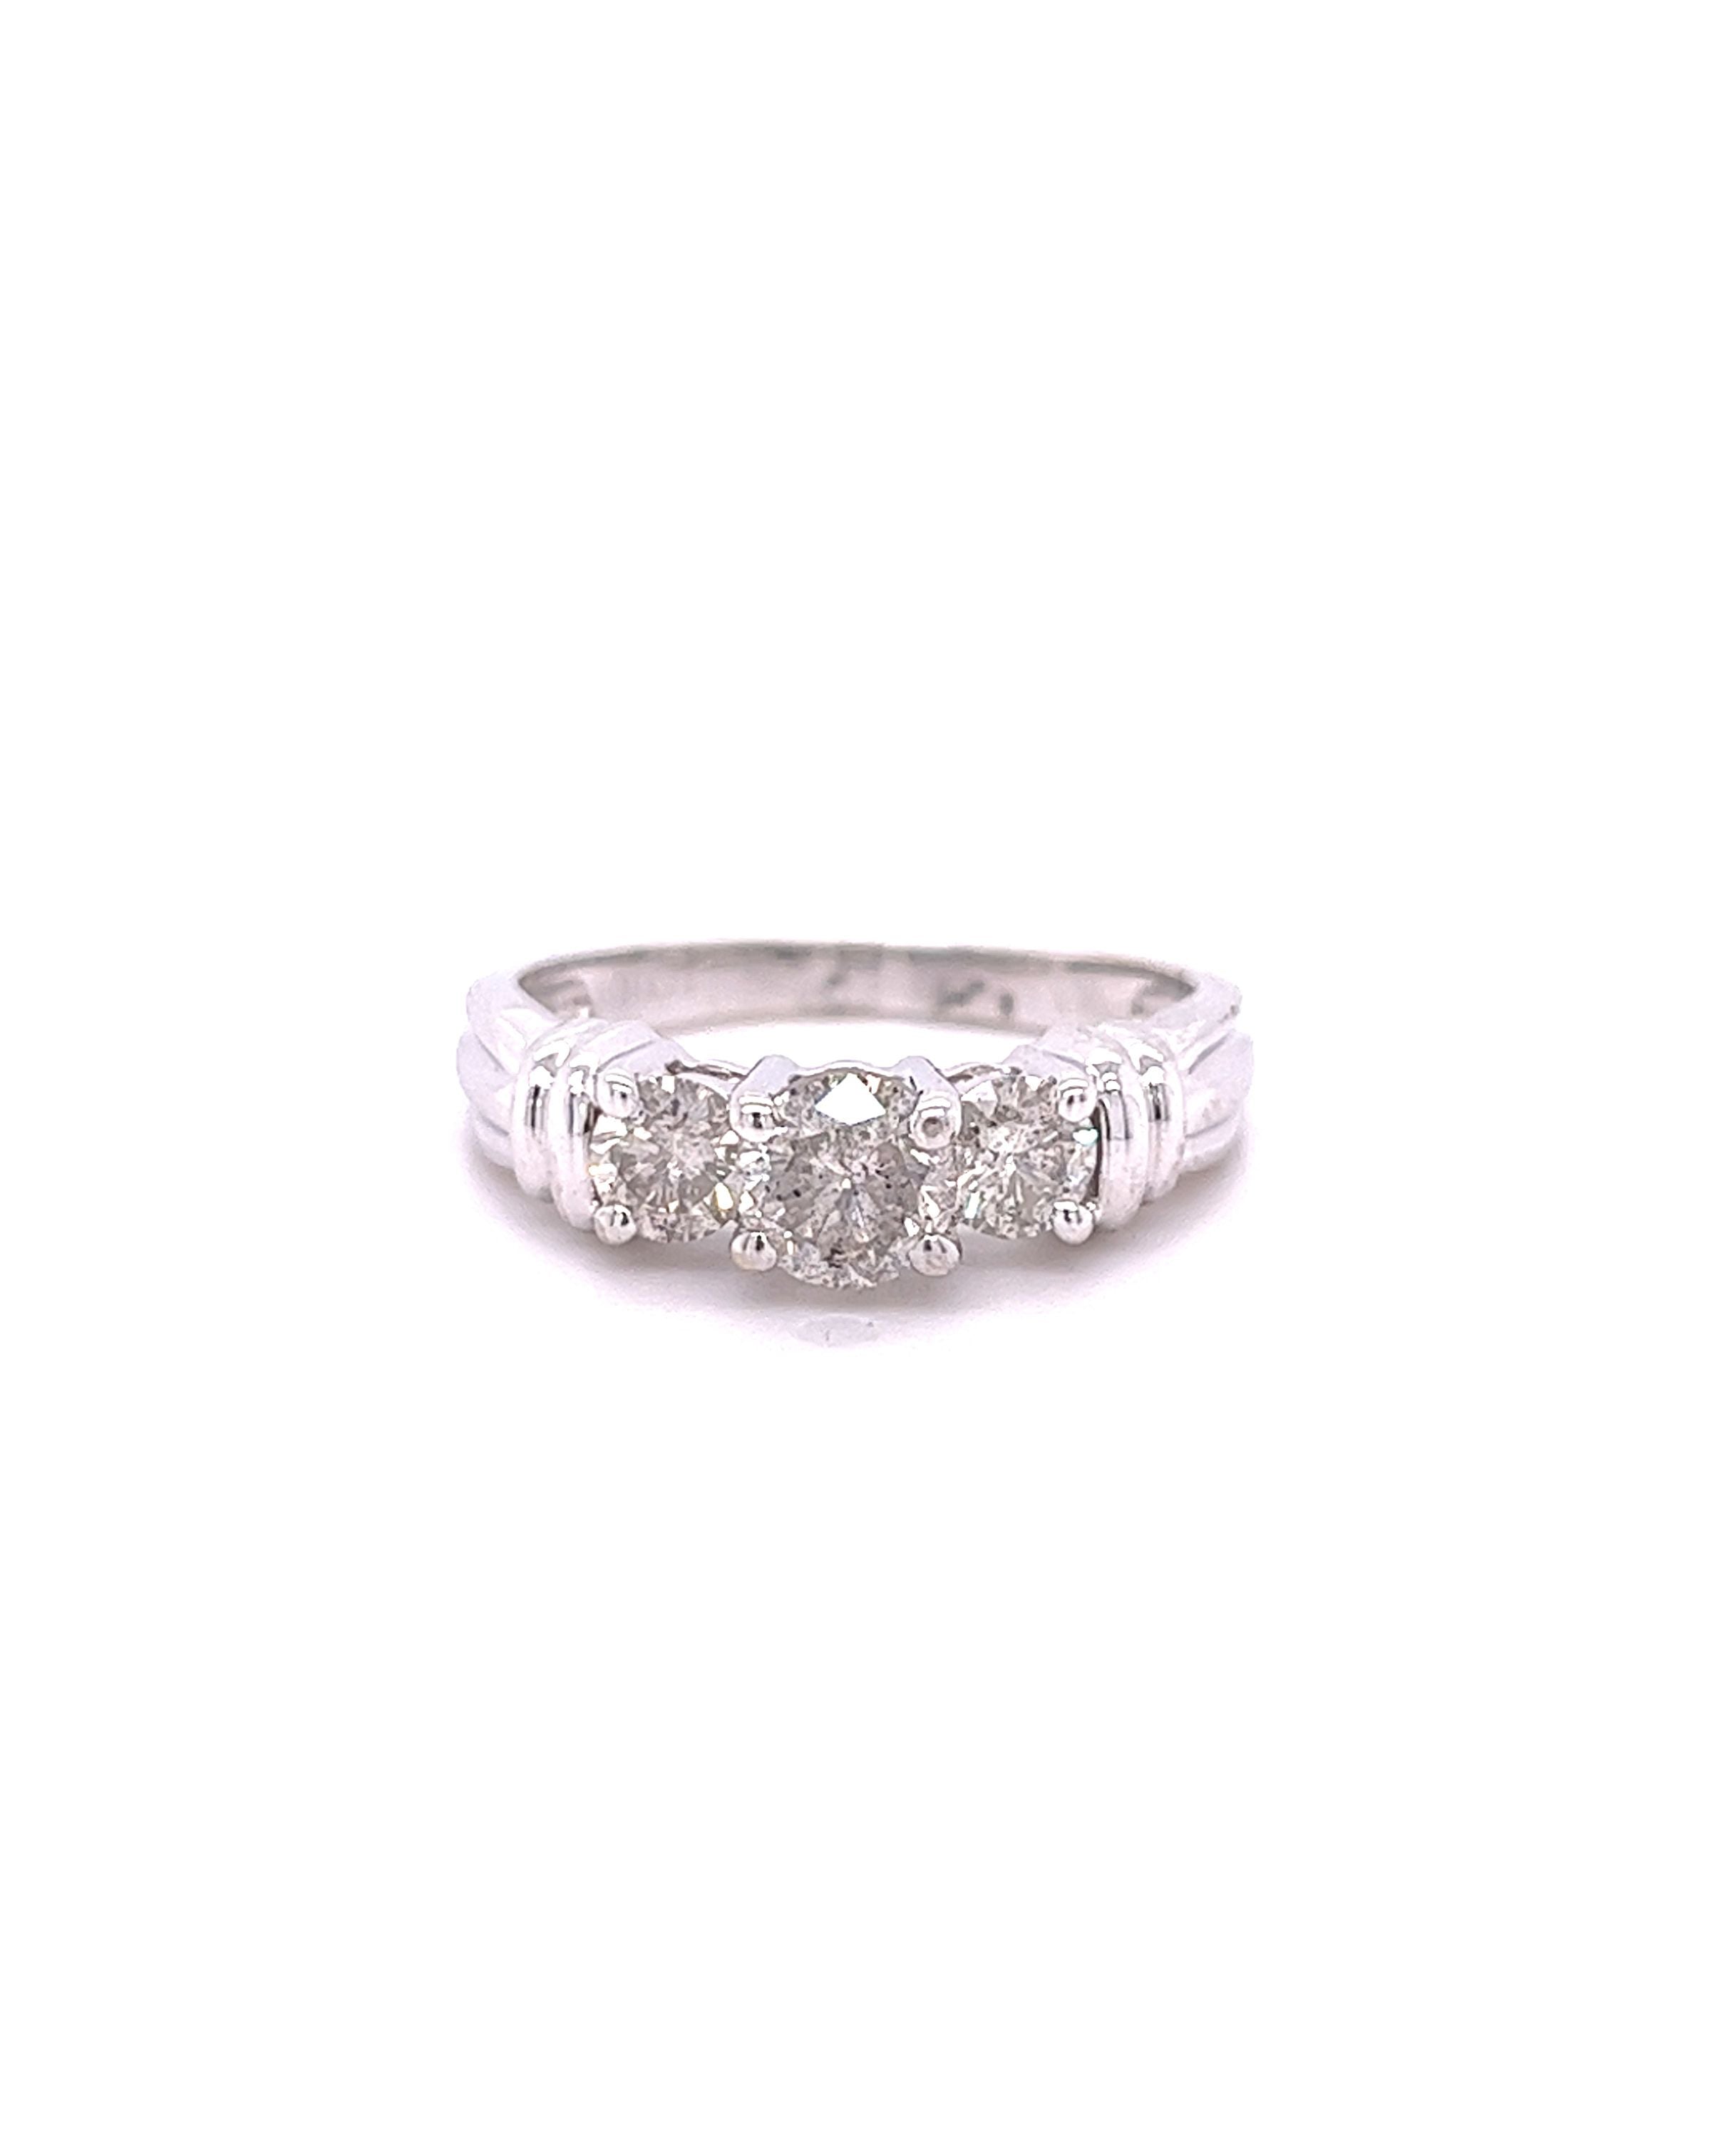 14KT WHITE GOLD FANCY 3 STONE ENGAGEMENT RING